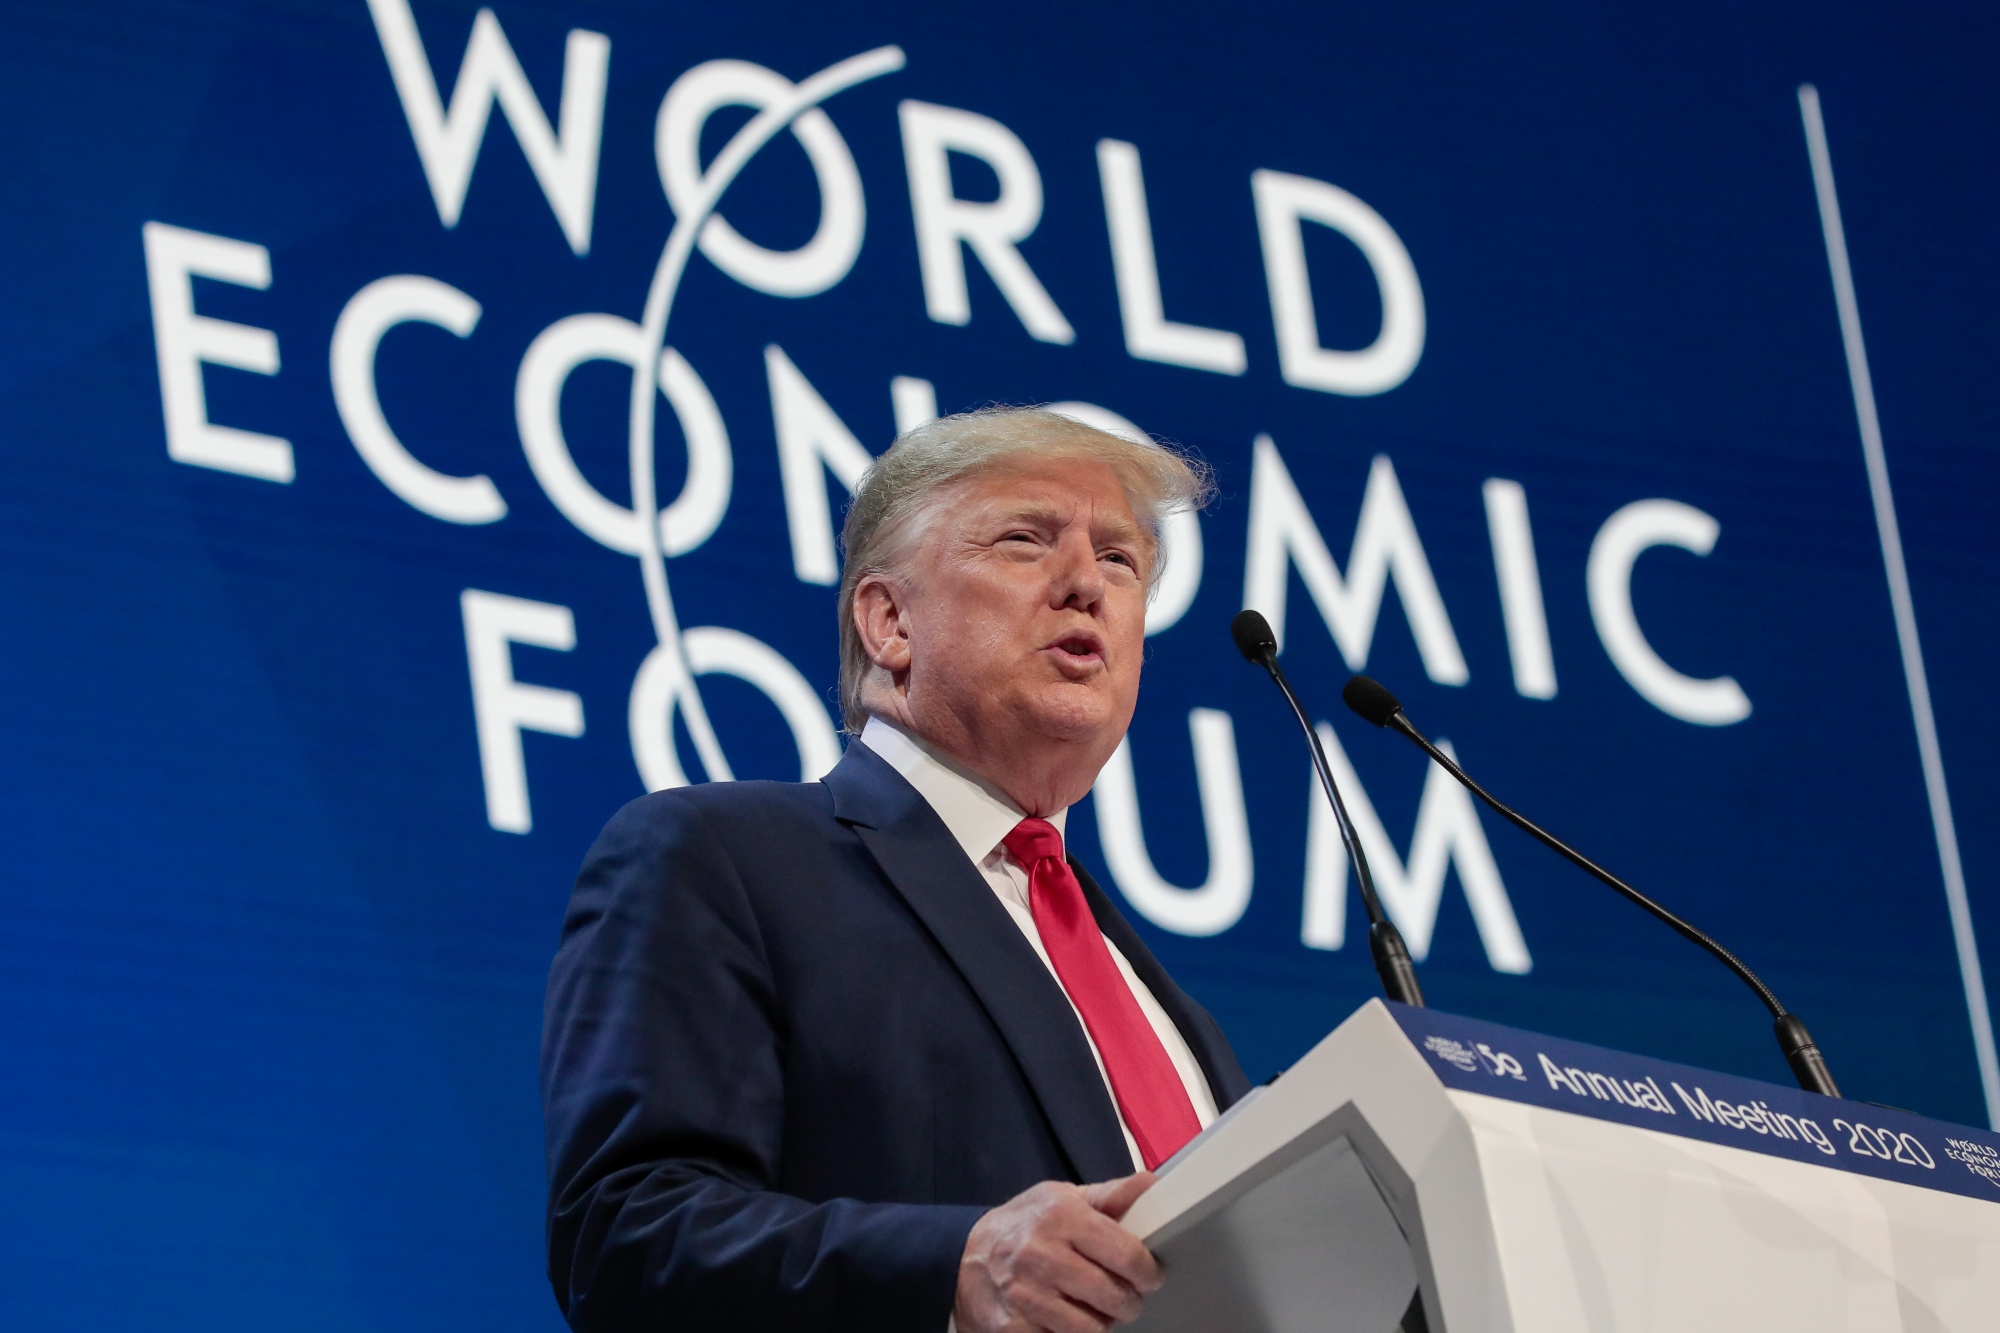 U.S. President Donald Trump delivers a speech during a special address on the opening day of the World Economic Forum in Davos